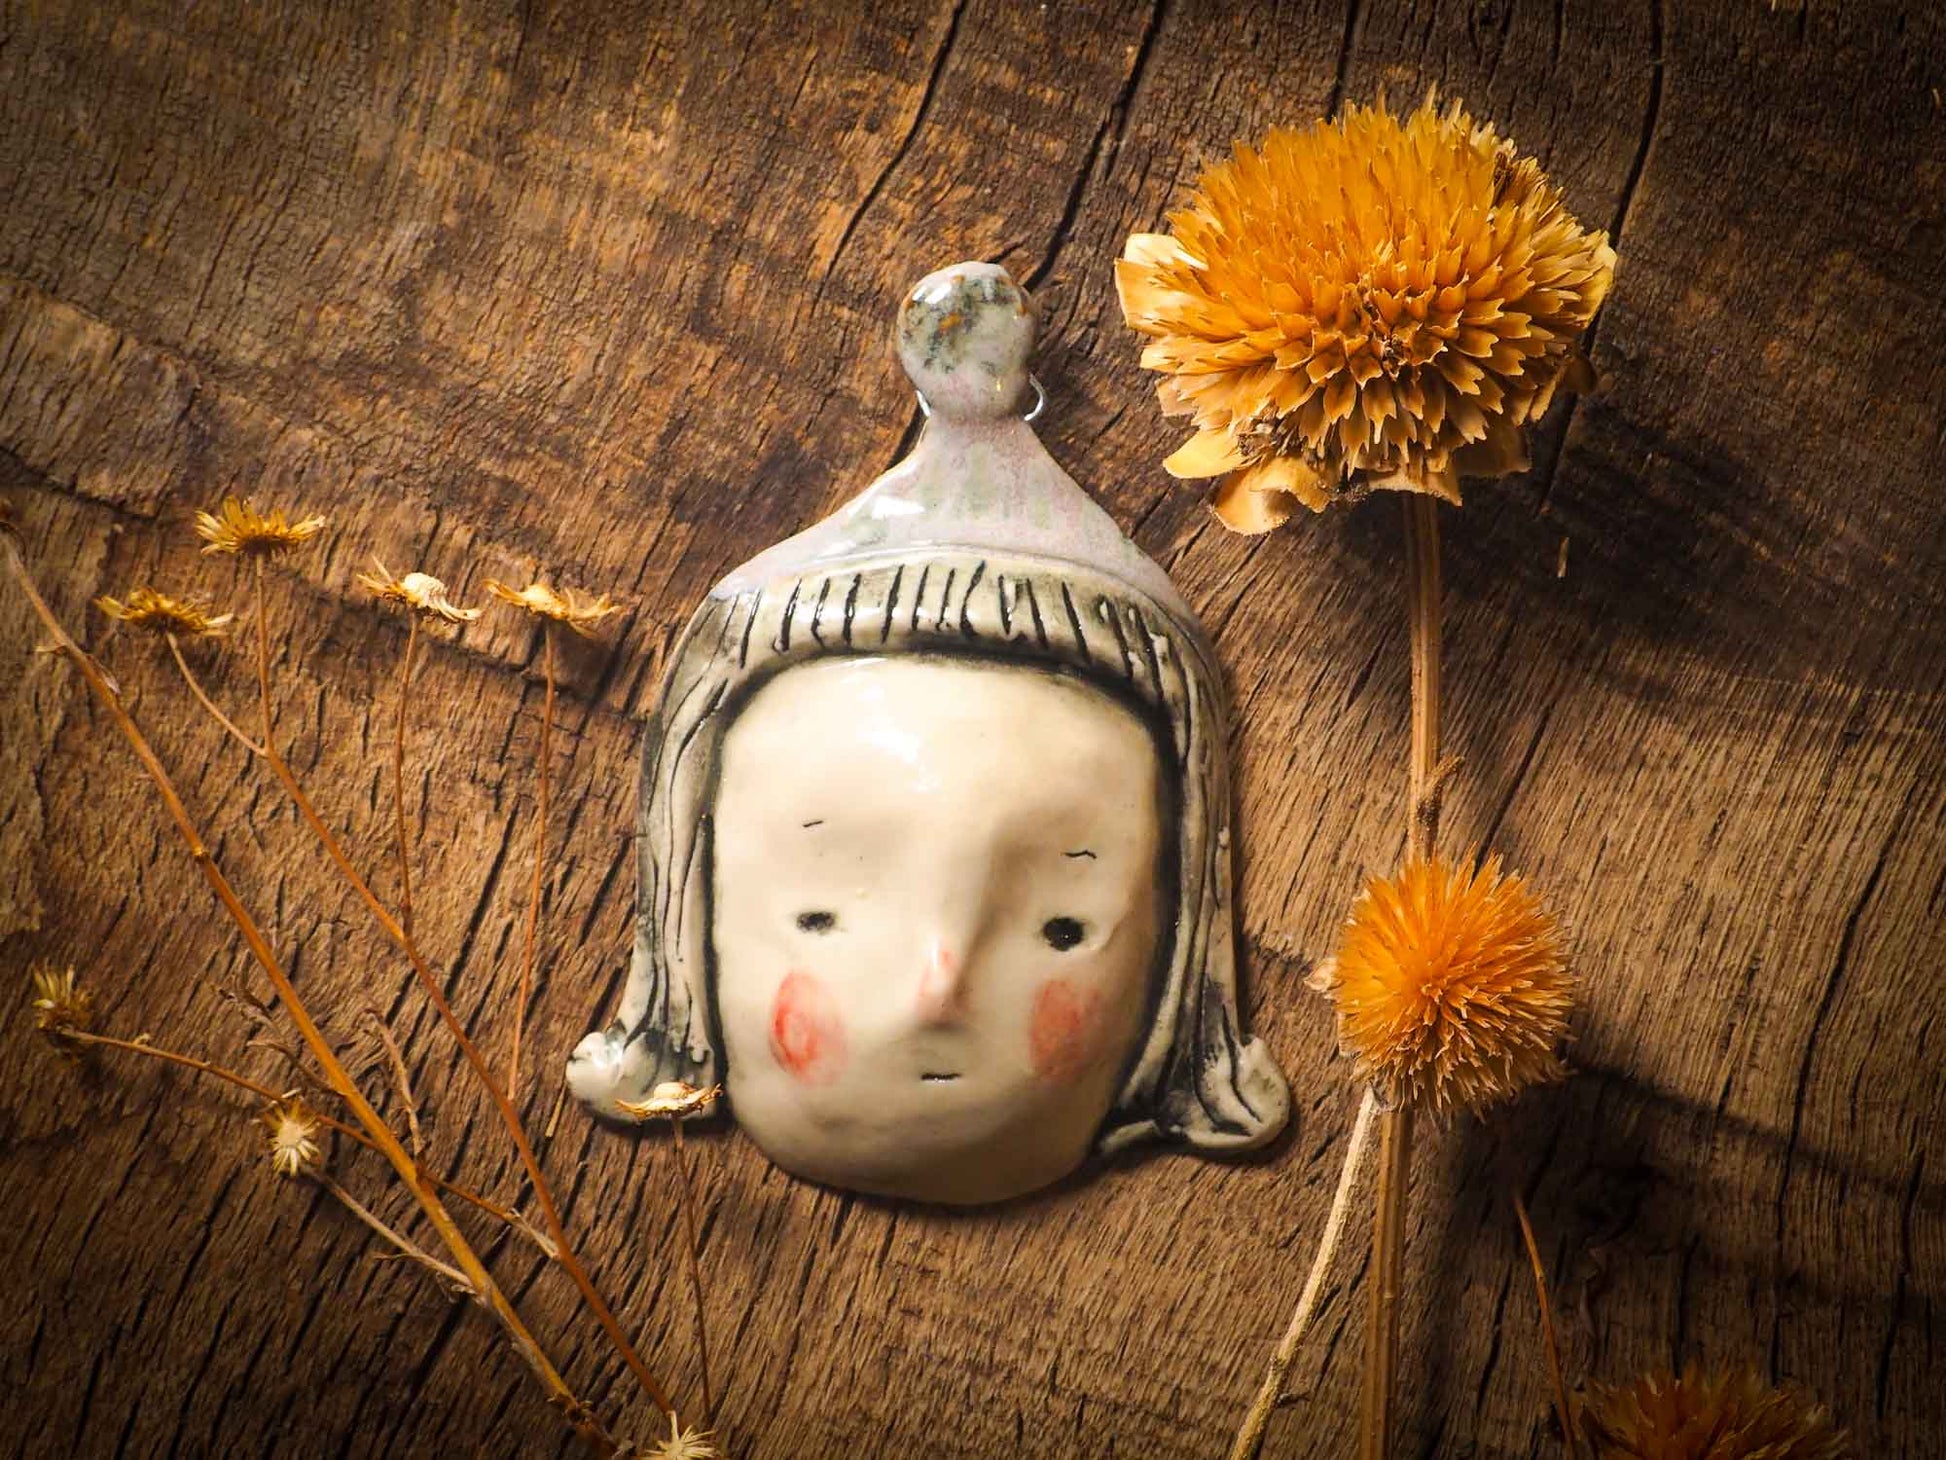 You are looking at an original handmade ceramic hanging face figurine by Idania Salcido, the artist behind Danita Art. Each one is a unique work of art on itself, designed and hand built by me, Idania Salcido. It will add a beautiful handmade touch to any artist's studio, and it's cute details will let your inspiration flow freely. 